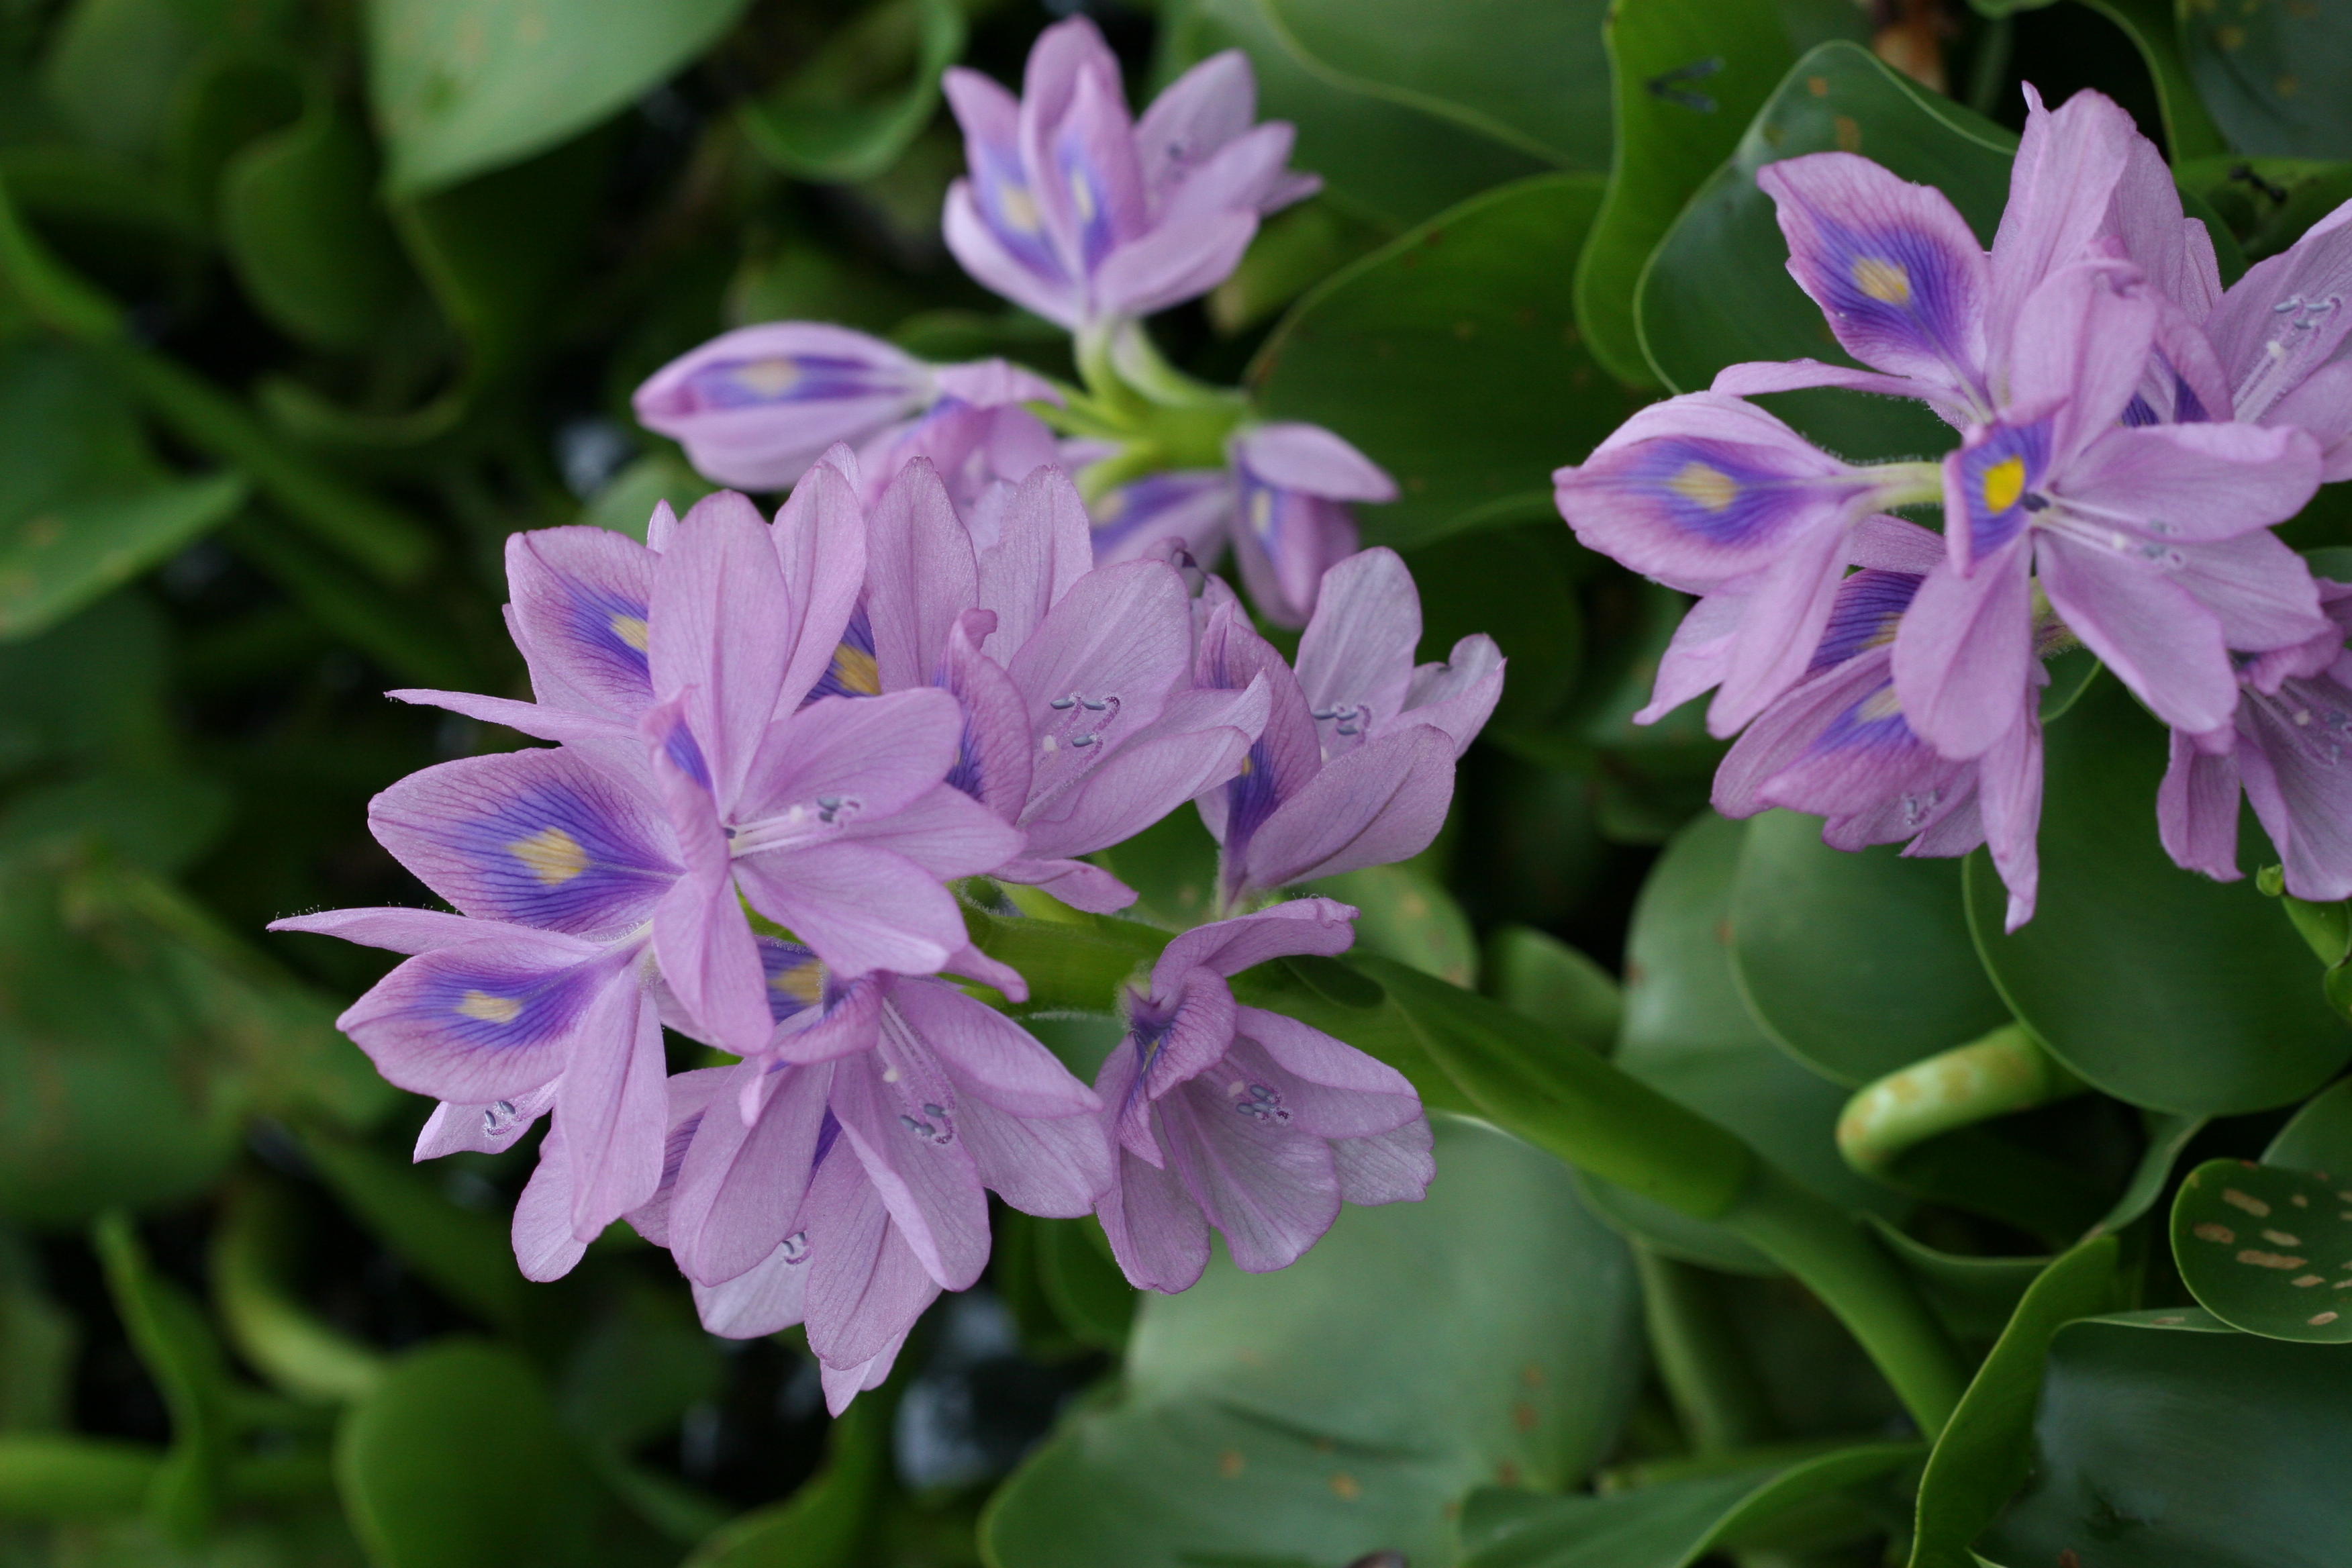 hoa cay beo nhat ban (Eichhornia crassipes Solms)